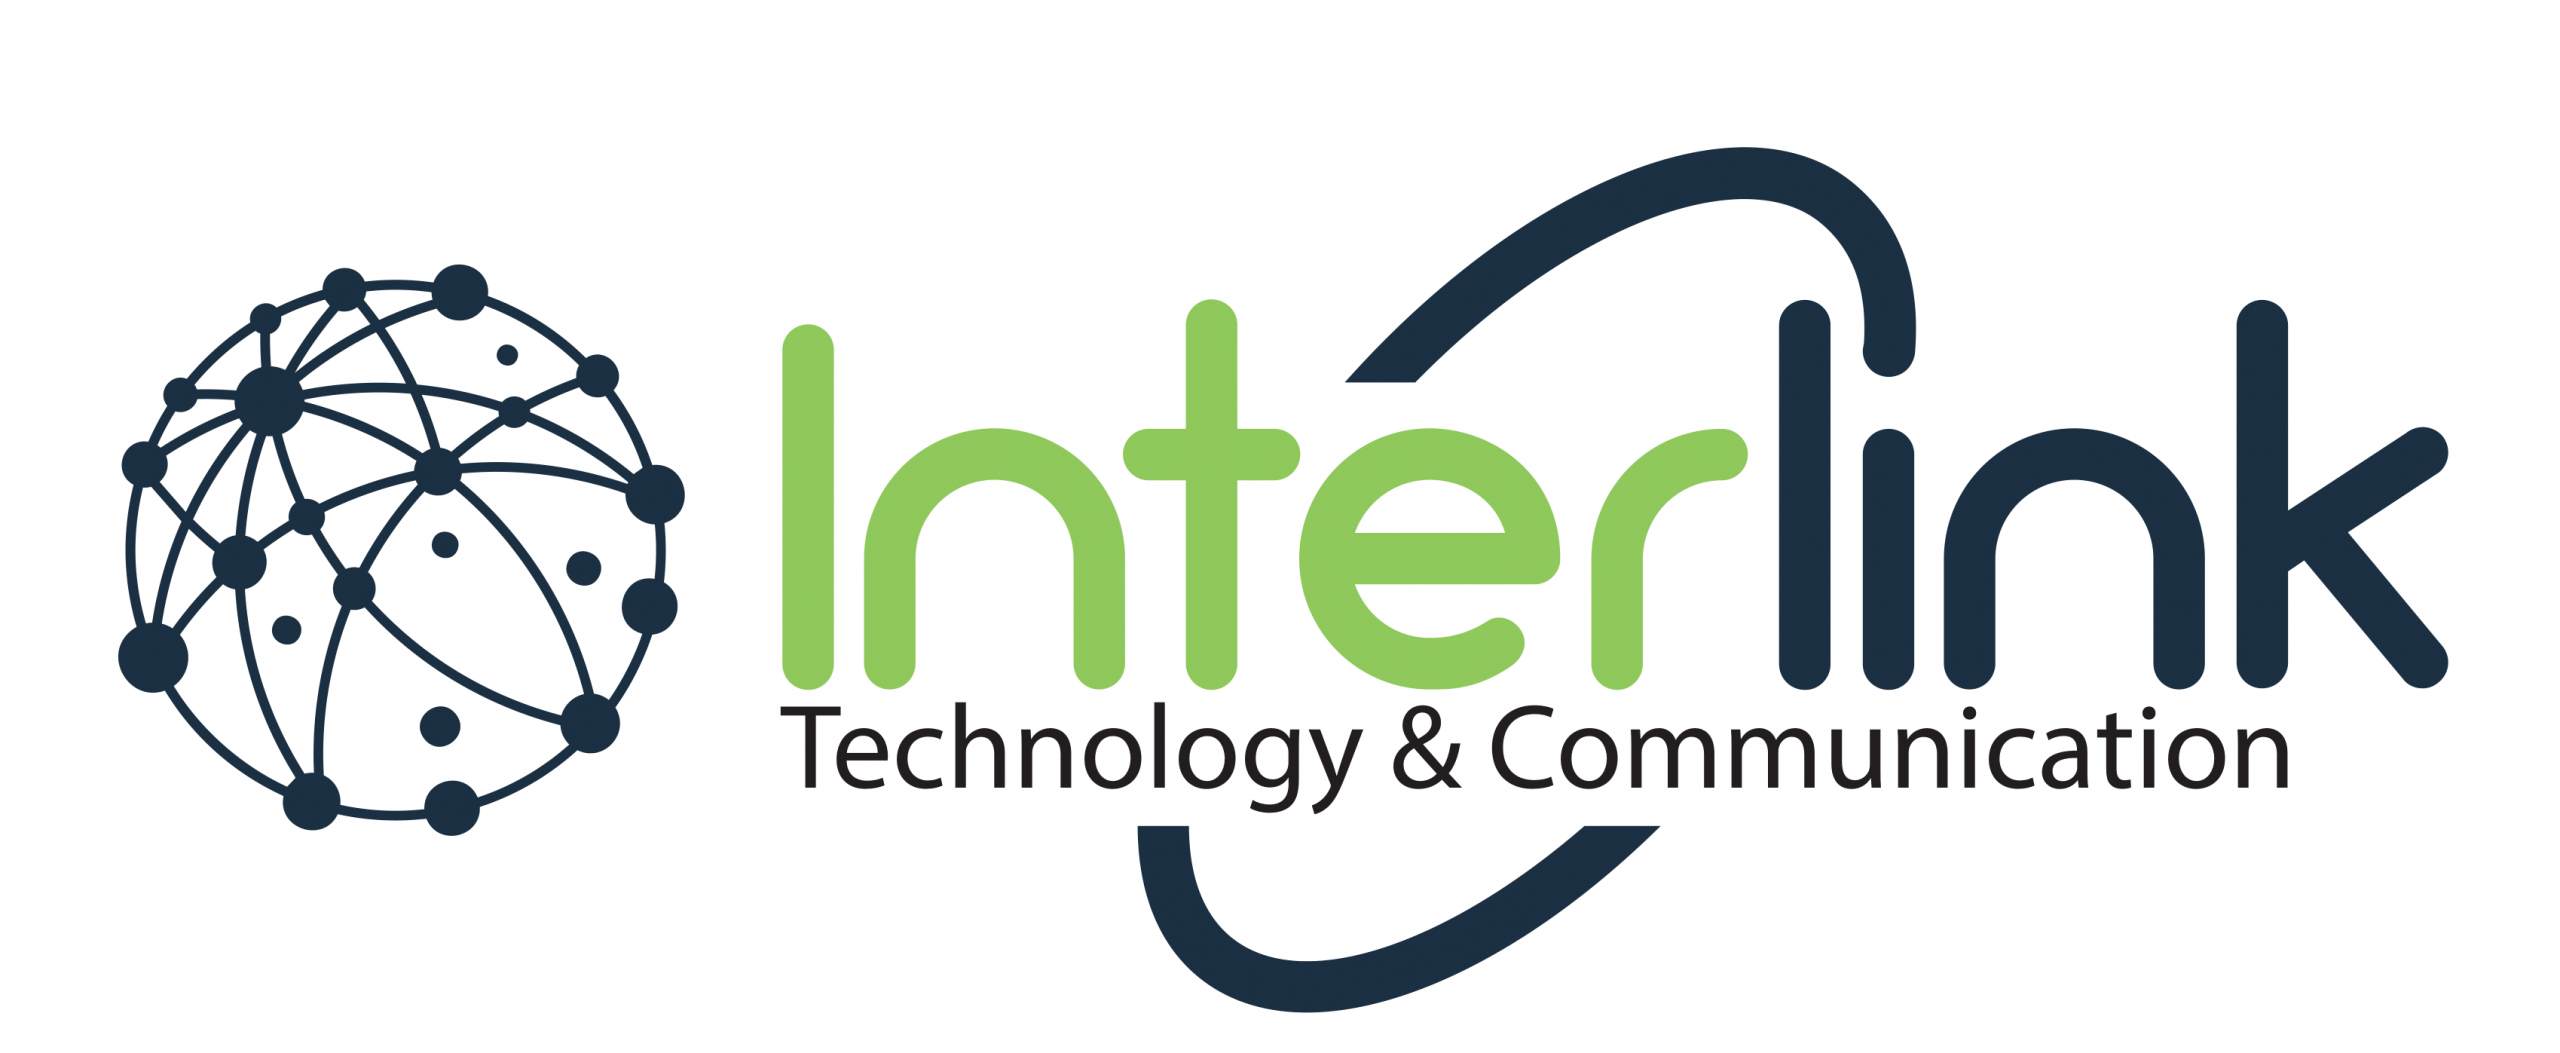 Business Internet Solutions & Disaster Recovery - Norfolk, VA